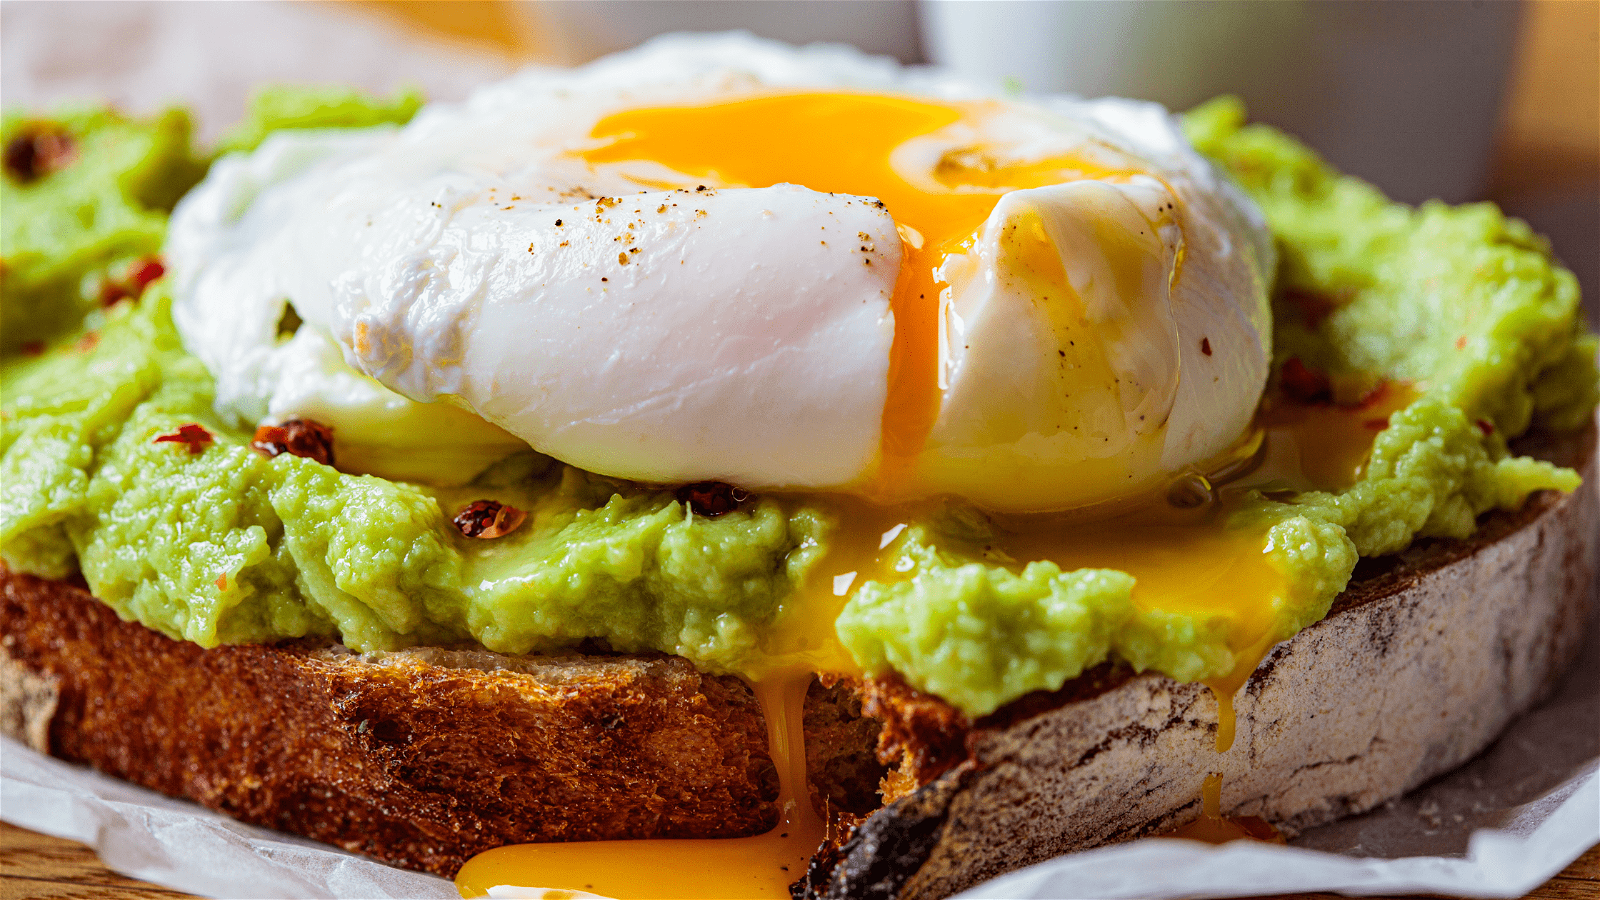 Image of Avocado Toast with Poached Egg